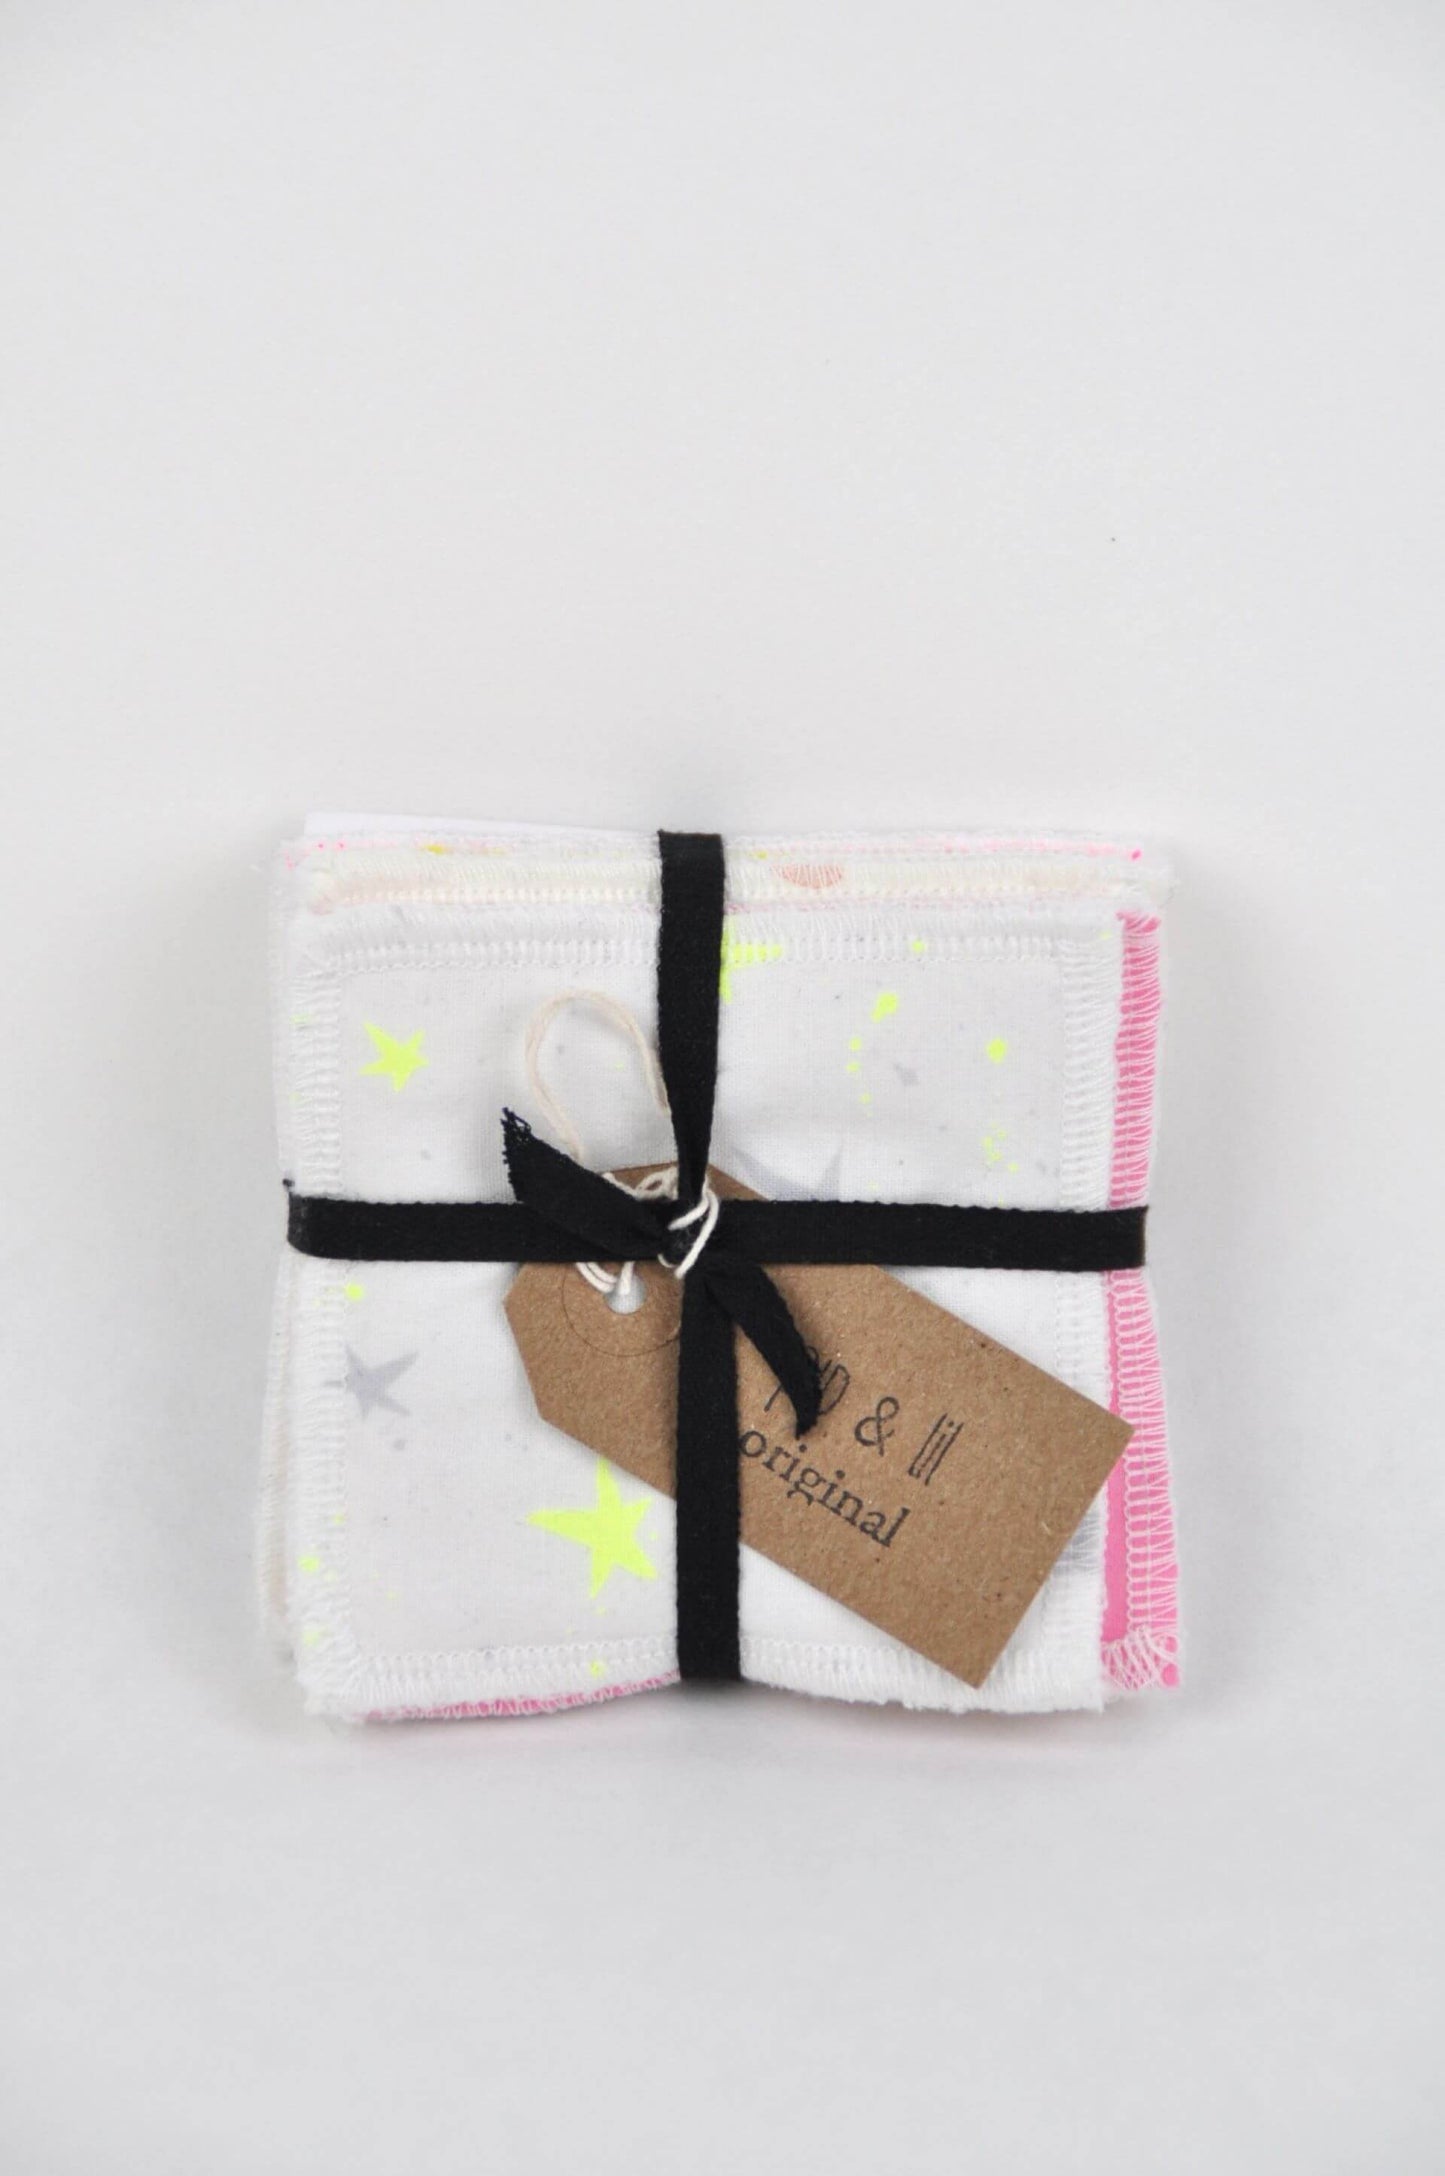 Pip & Lil Face Wipes Reusable Face Cloths - Neon